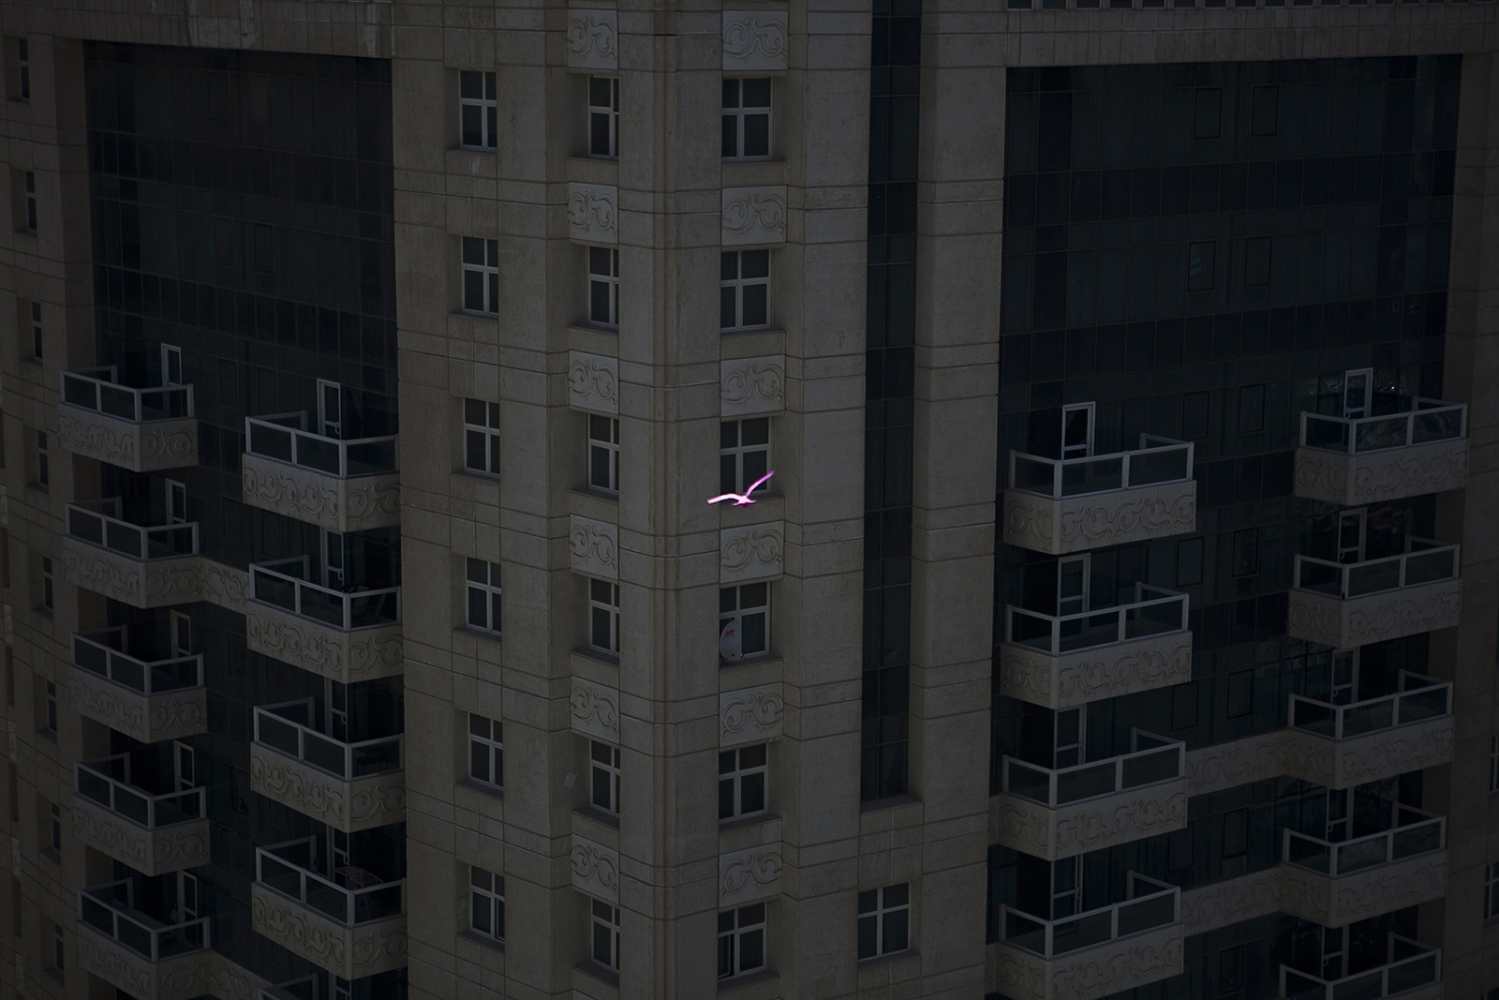  DOHA, QATAR- 20 FEBRUARY 2014 A pink coloured pigeon flies between buildings. Photo by Natalie Naccache/Getty Image Reportage/ Magnum...